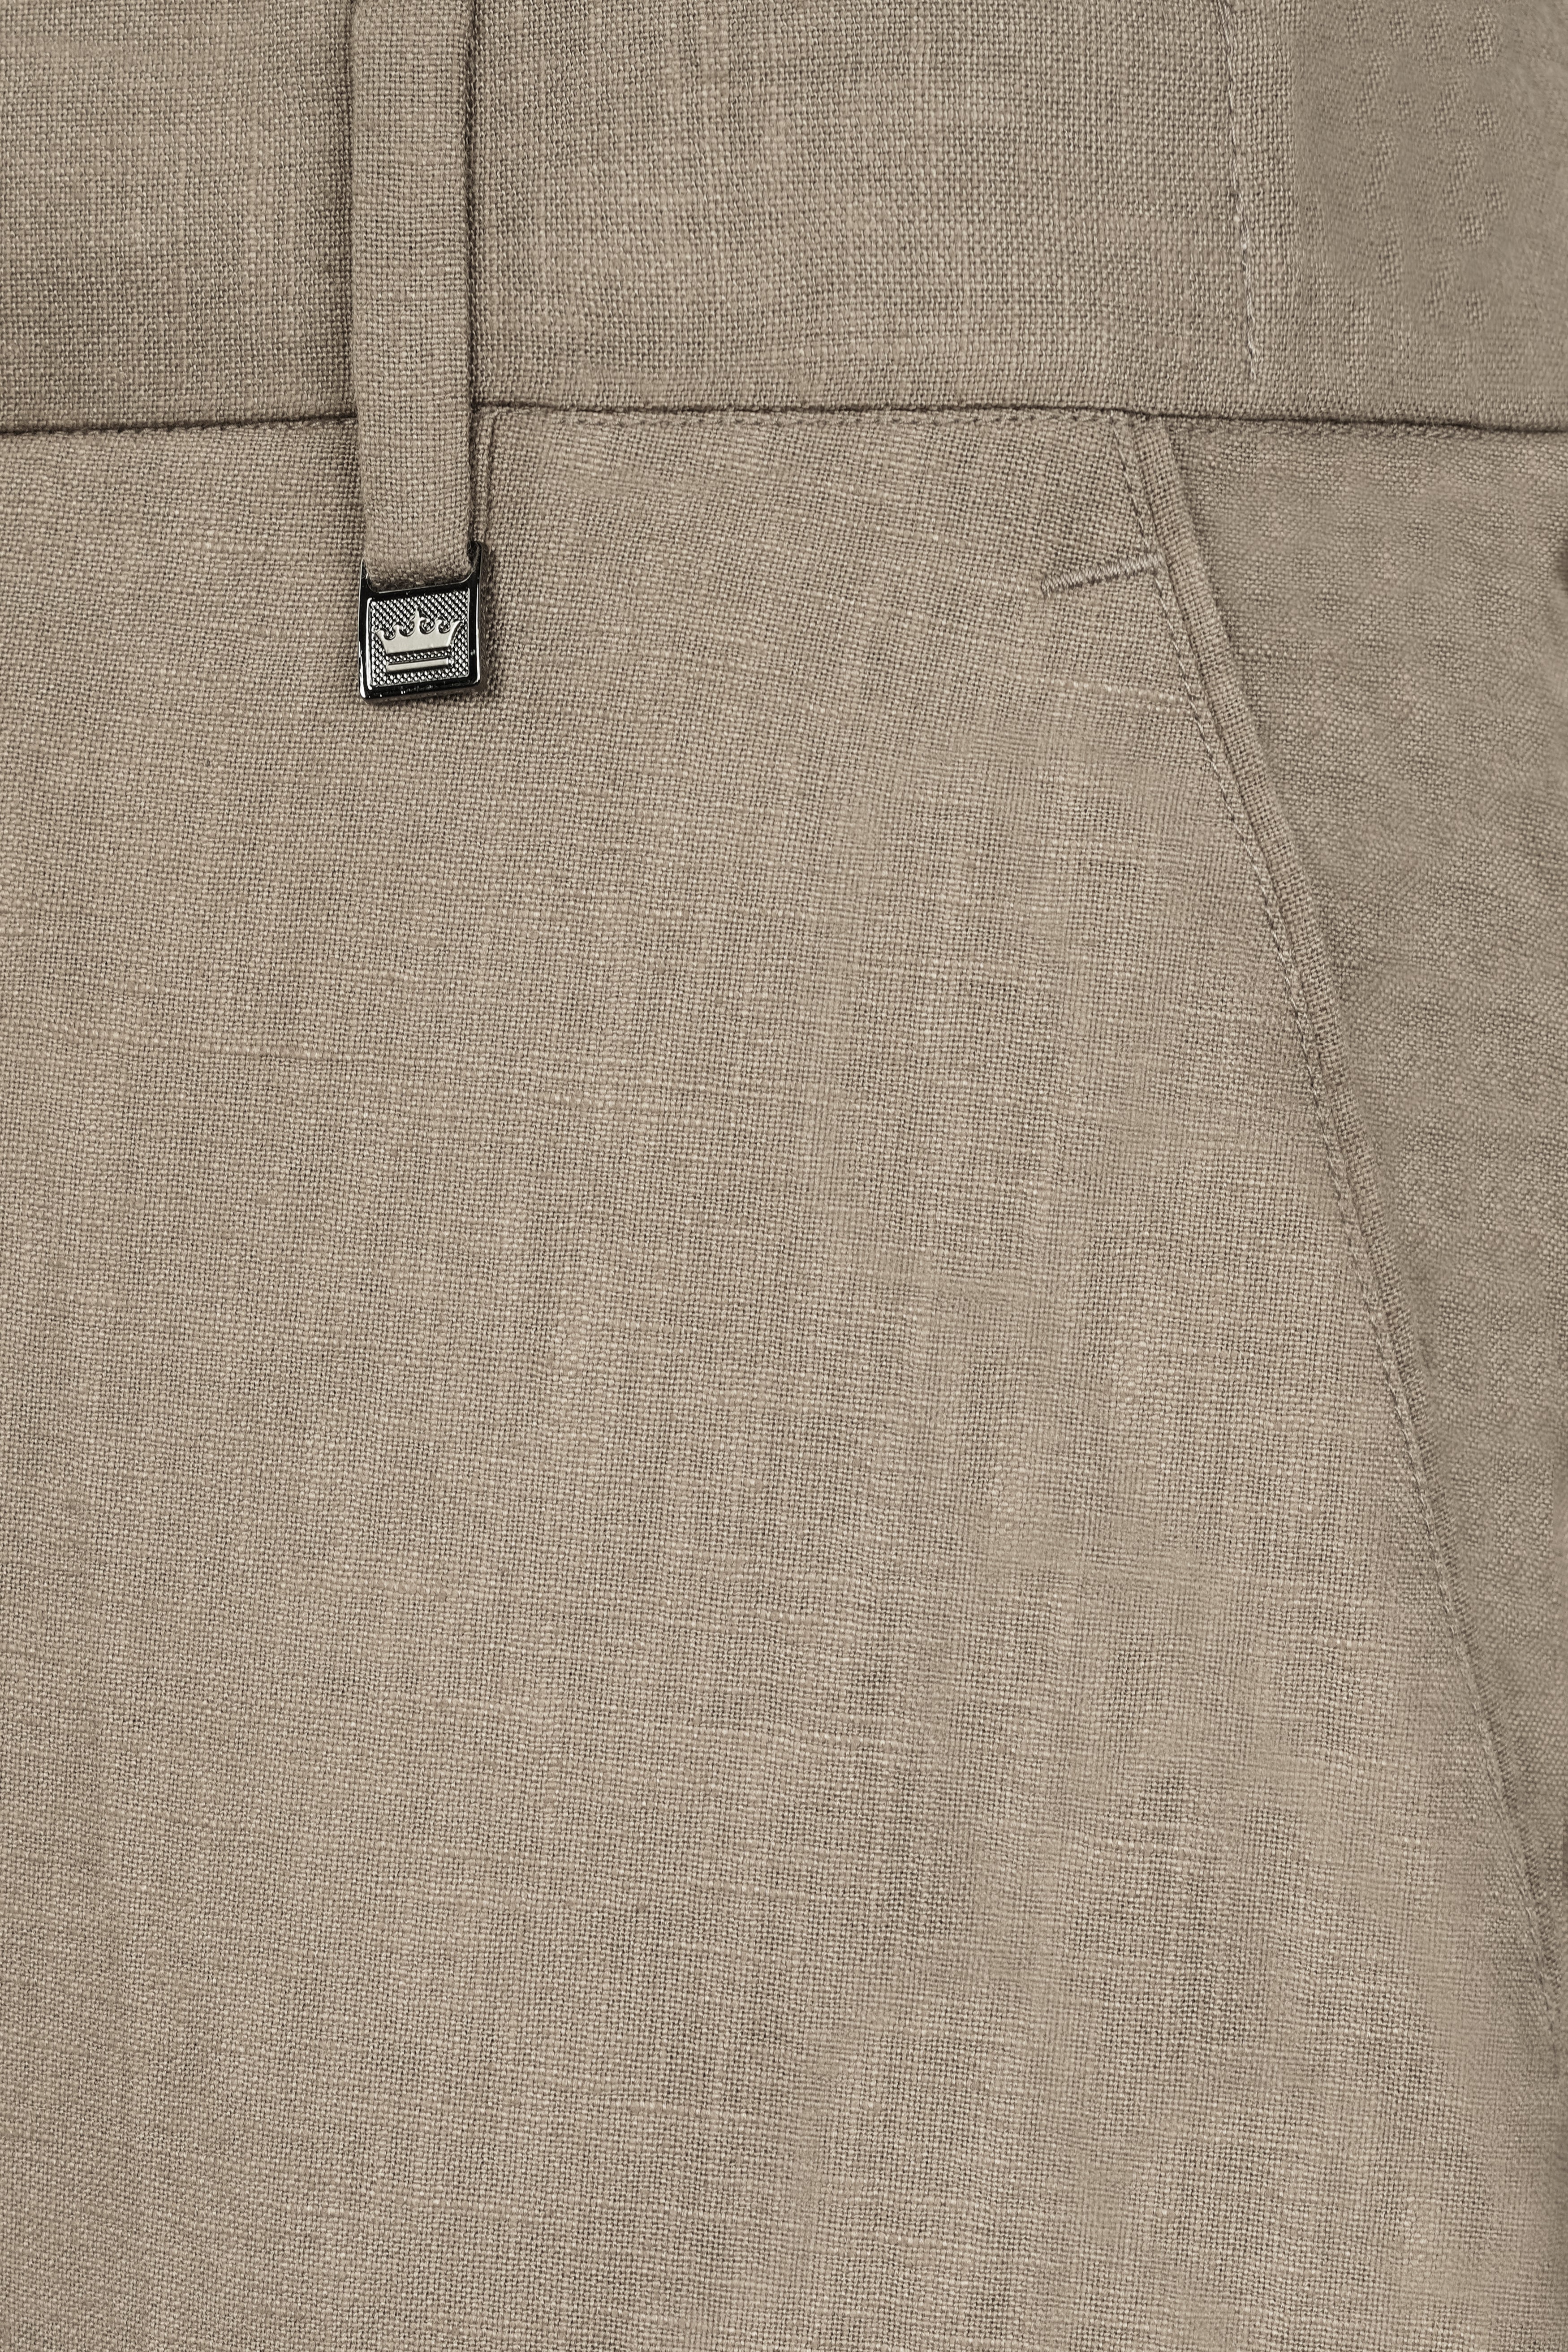 Oyster Brown Luxurious Linen Double Breasted Sports SuitST3118-DB-PP-36, ST3118-DB-PP-38, ST3118-DB-PP-40, ST3118-DB-PP-42, ST3118-DB-PP-44, ST3118-DB-PP-46, ST3118-DB-PP-48, ST3118-DB-PP-50, ST3118-DB-PP-52, ST3118-DB-PP-54, ST3118-DB-PP-56, ST3118-DB-PP-58, ST3118-DB-PP-60